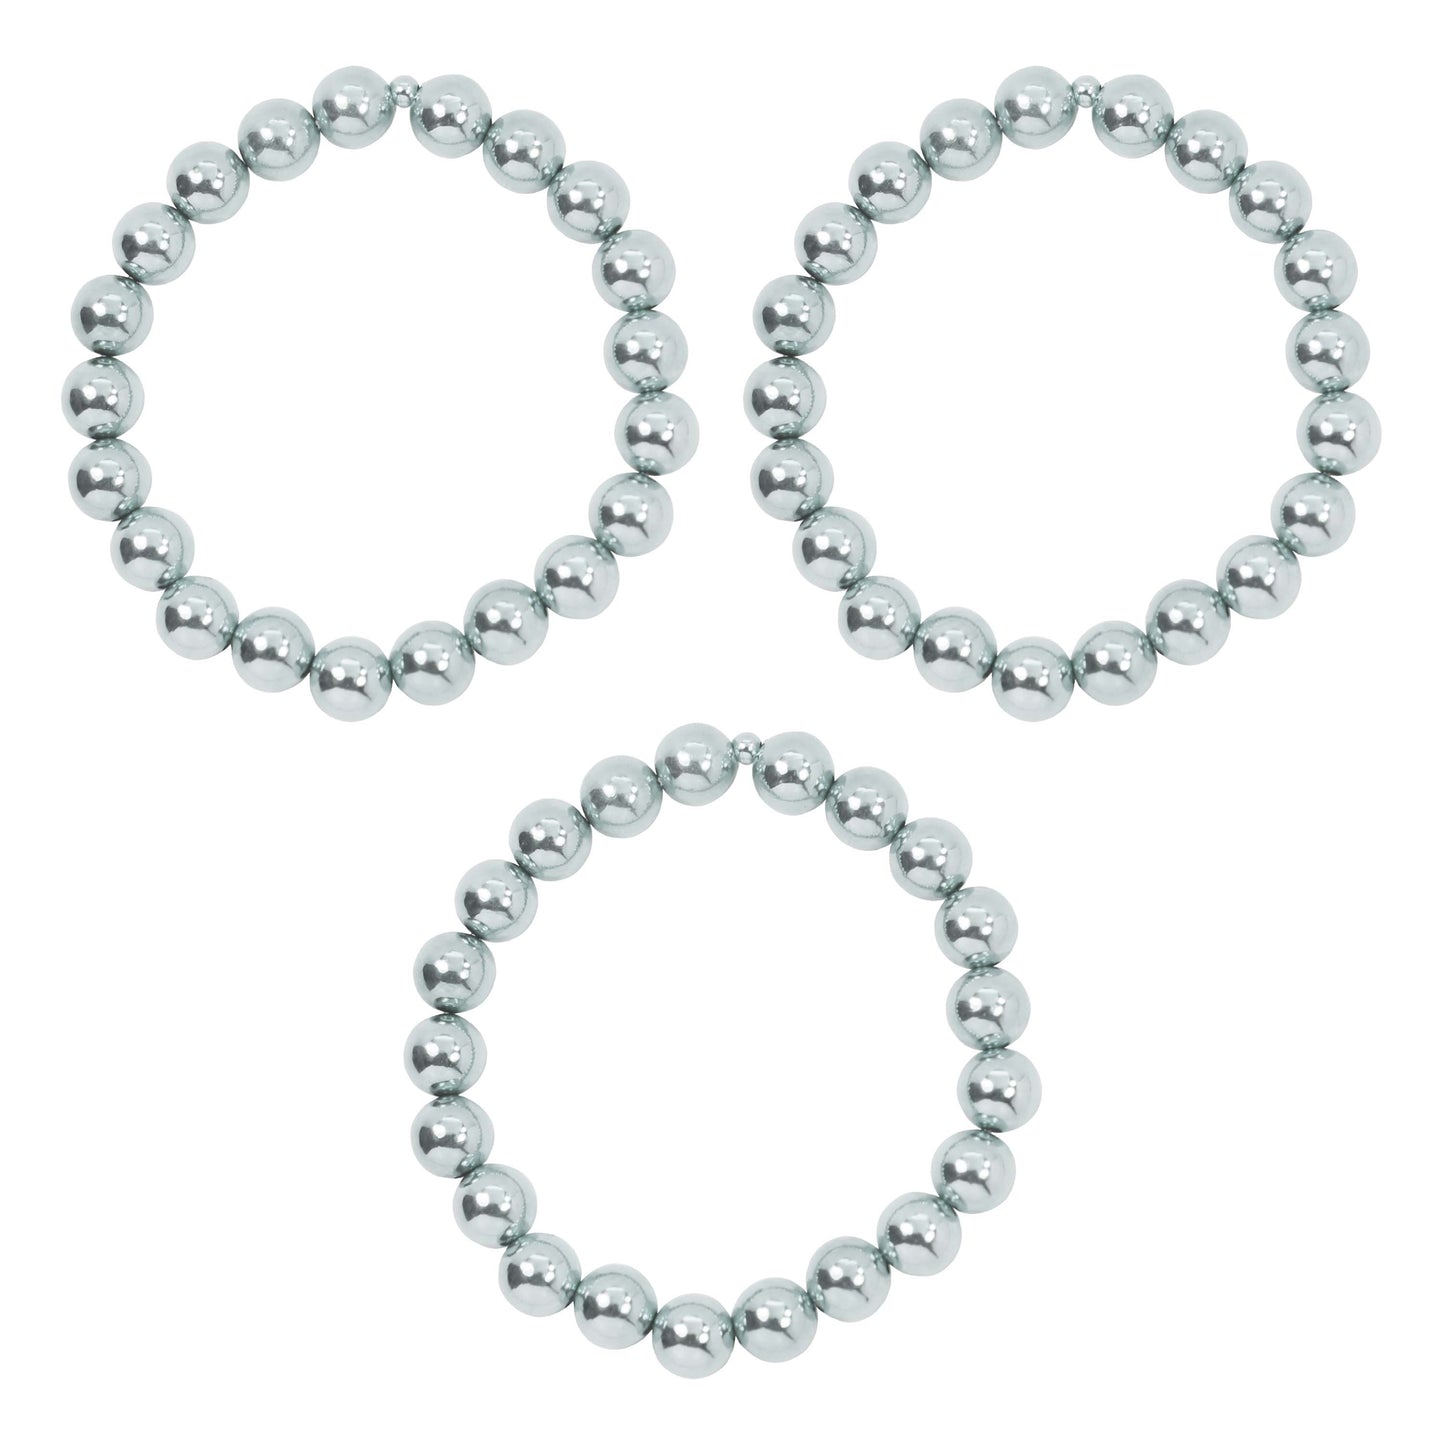 Stretchy Kindness Adult Bracelet Three-Pack (8MM beads)